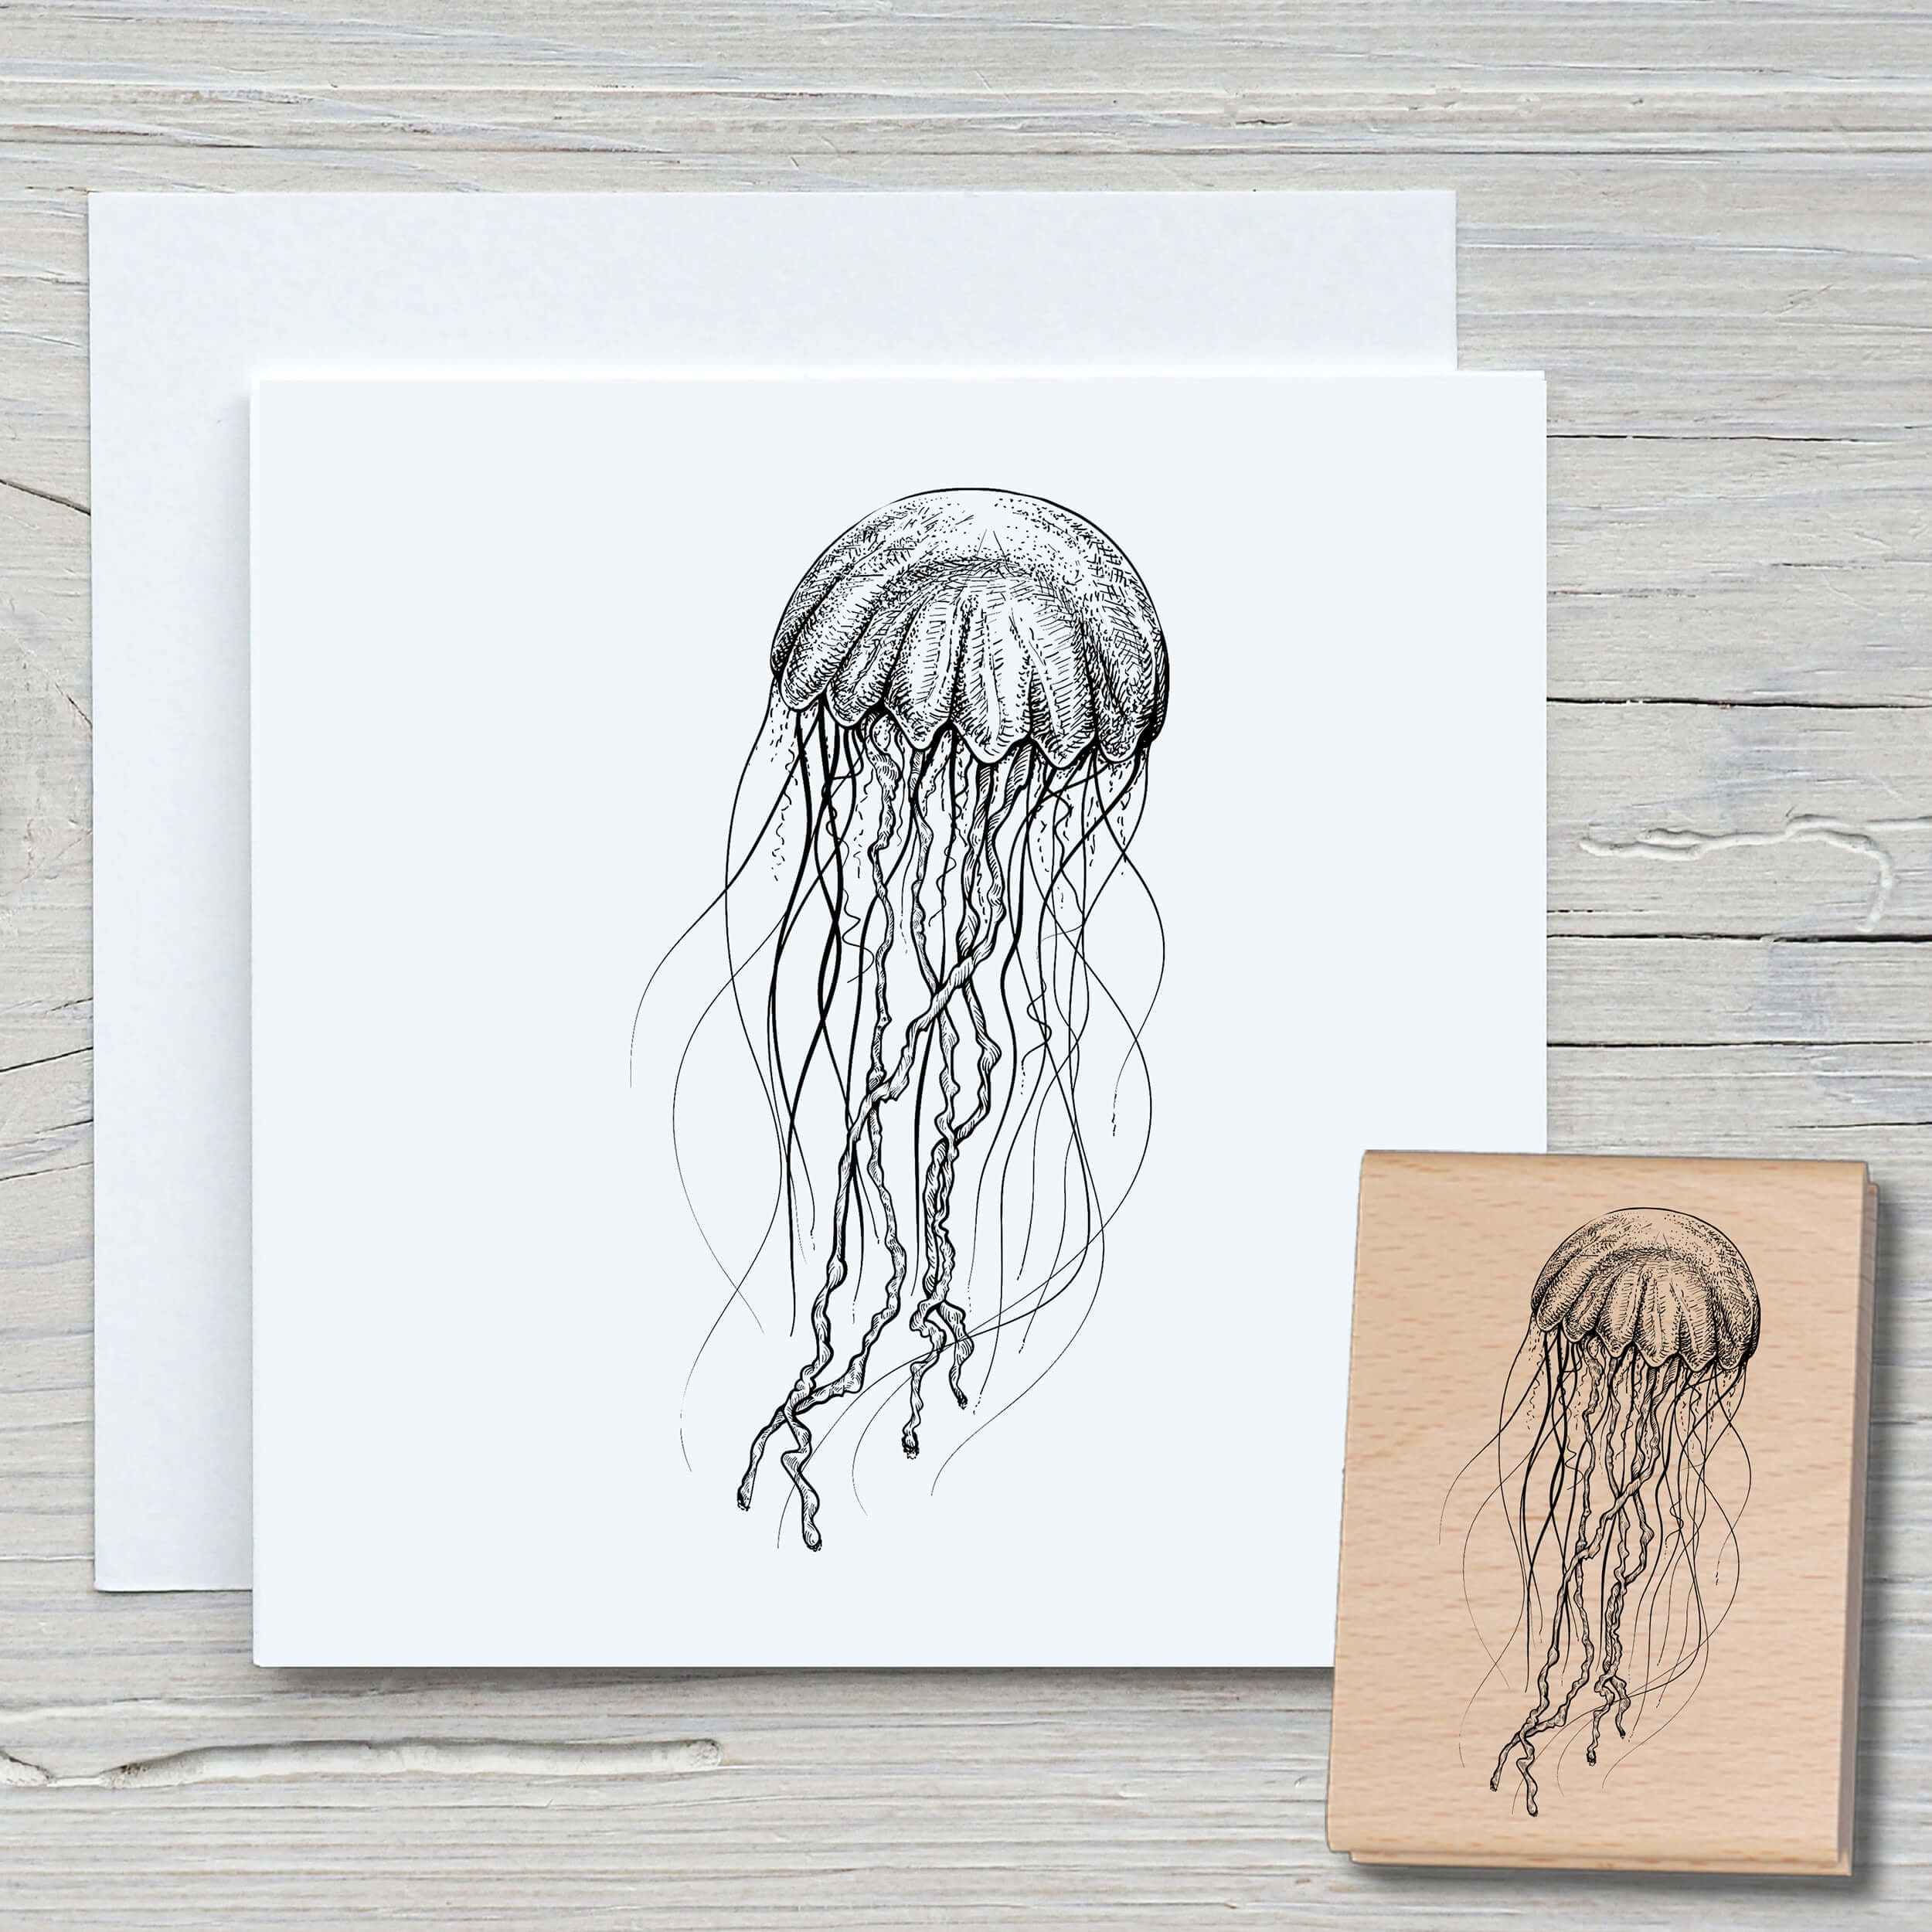 Jelly Fish Wrapping Paper, Jellyfish Dreams Wraps, Underwater Wonder Gift  Wrap, Ocean's Glow Wrapping Paper, Jellyfish Serenade Gift Wrap 